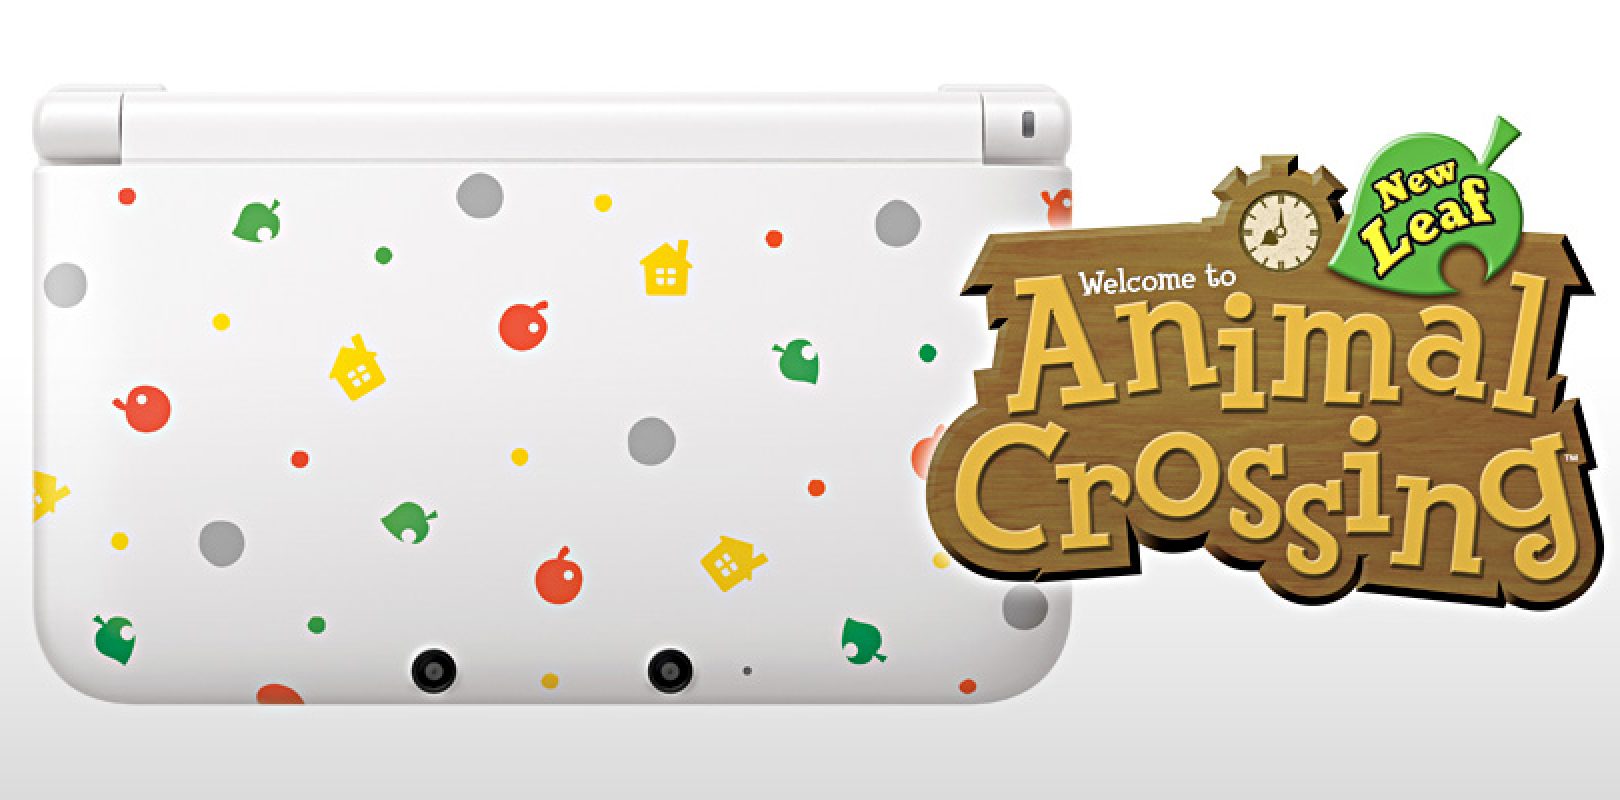 nintendo 3ds xl animal crossing limited edition